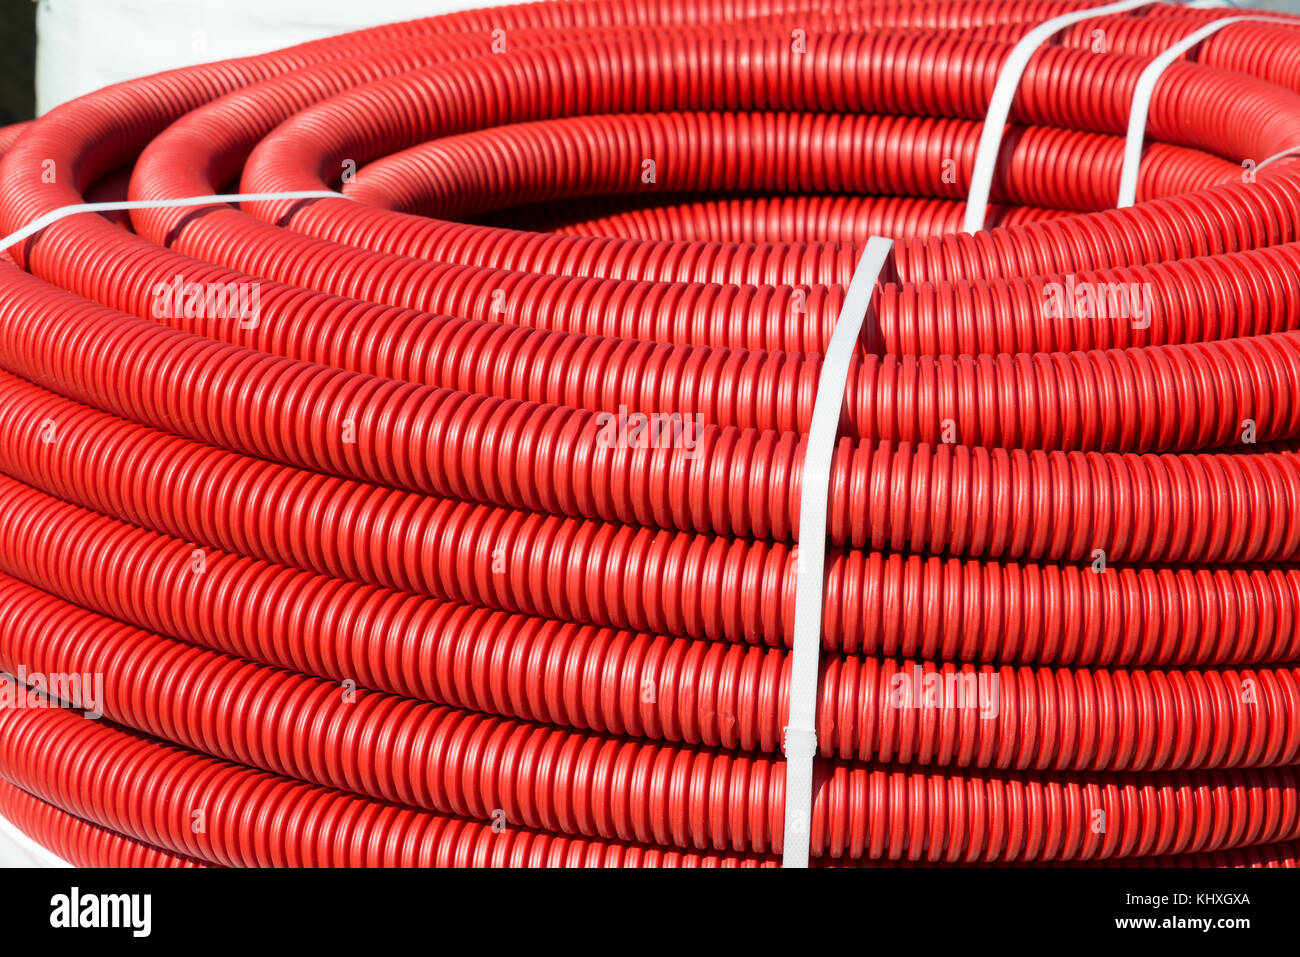 roll of red Flexible Plastic Pipes Stock Photo